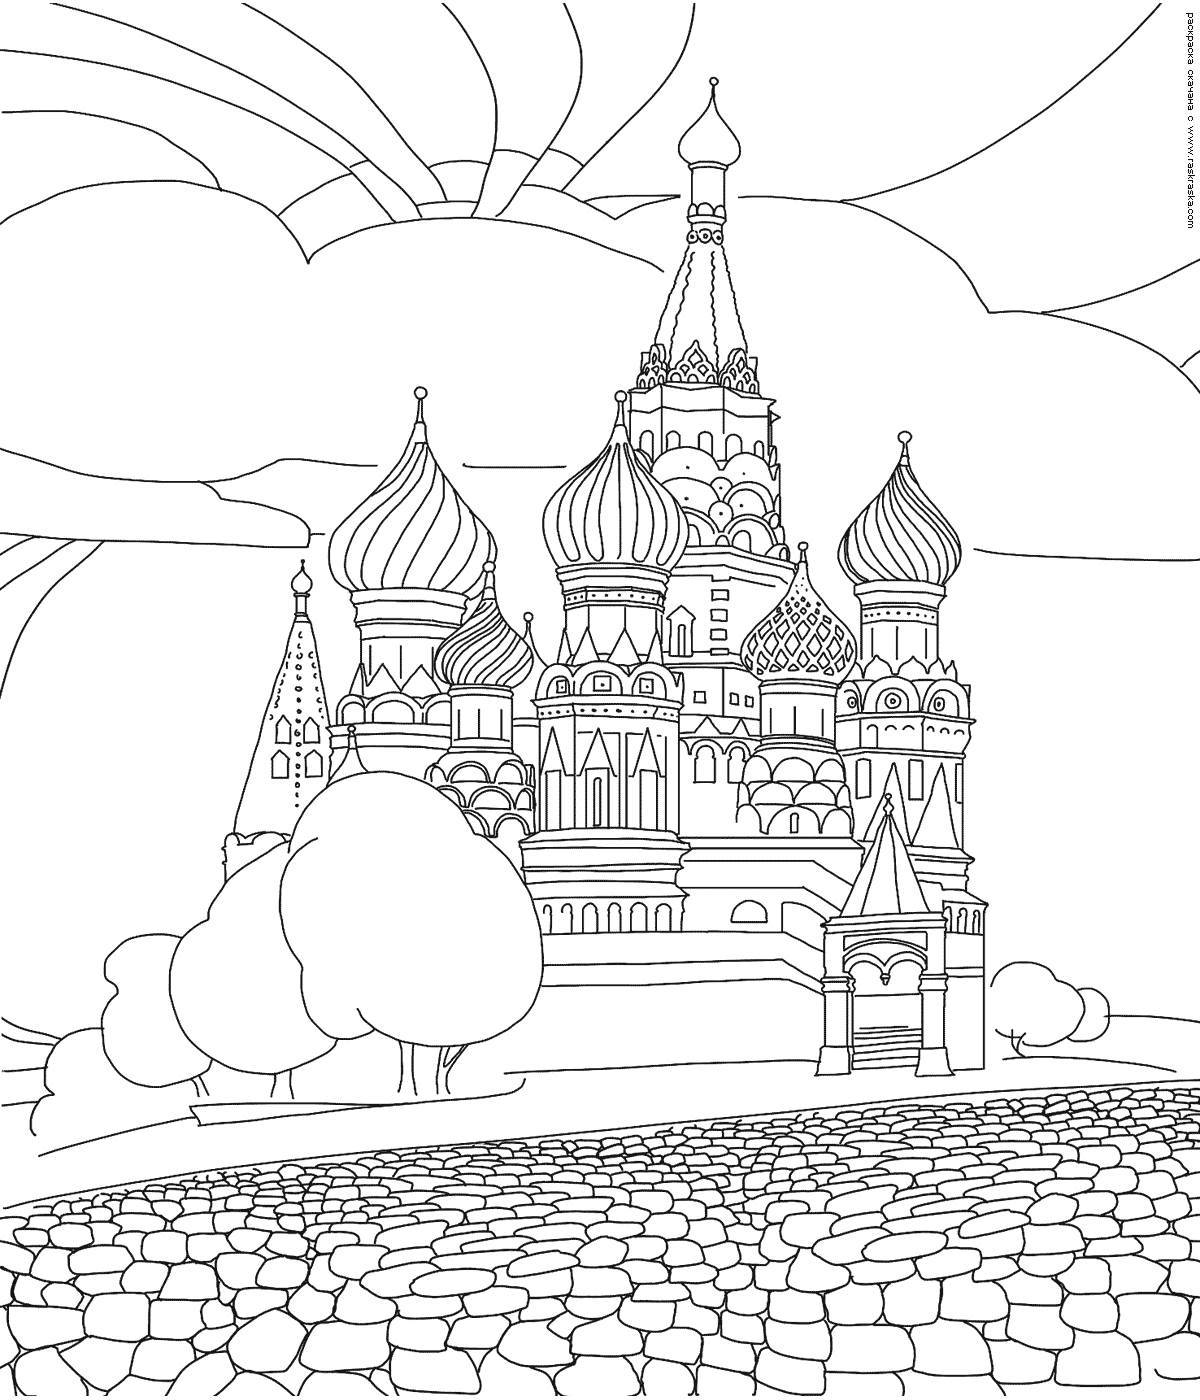 Bright red square coloring page